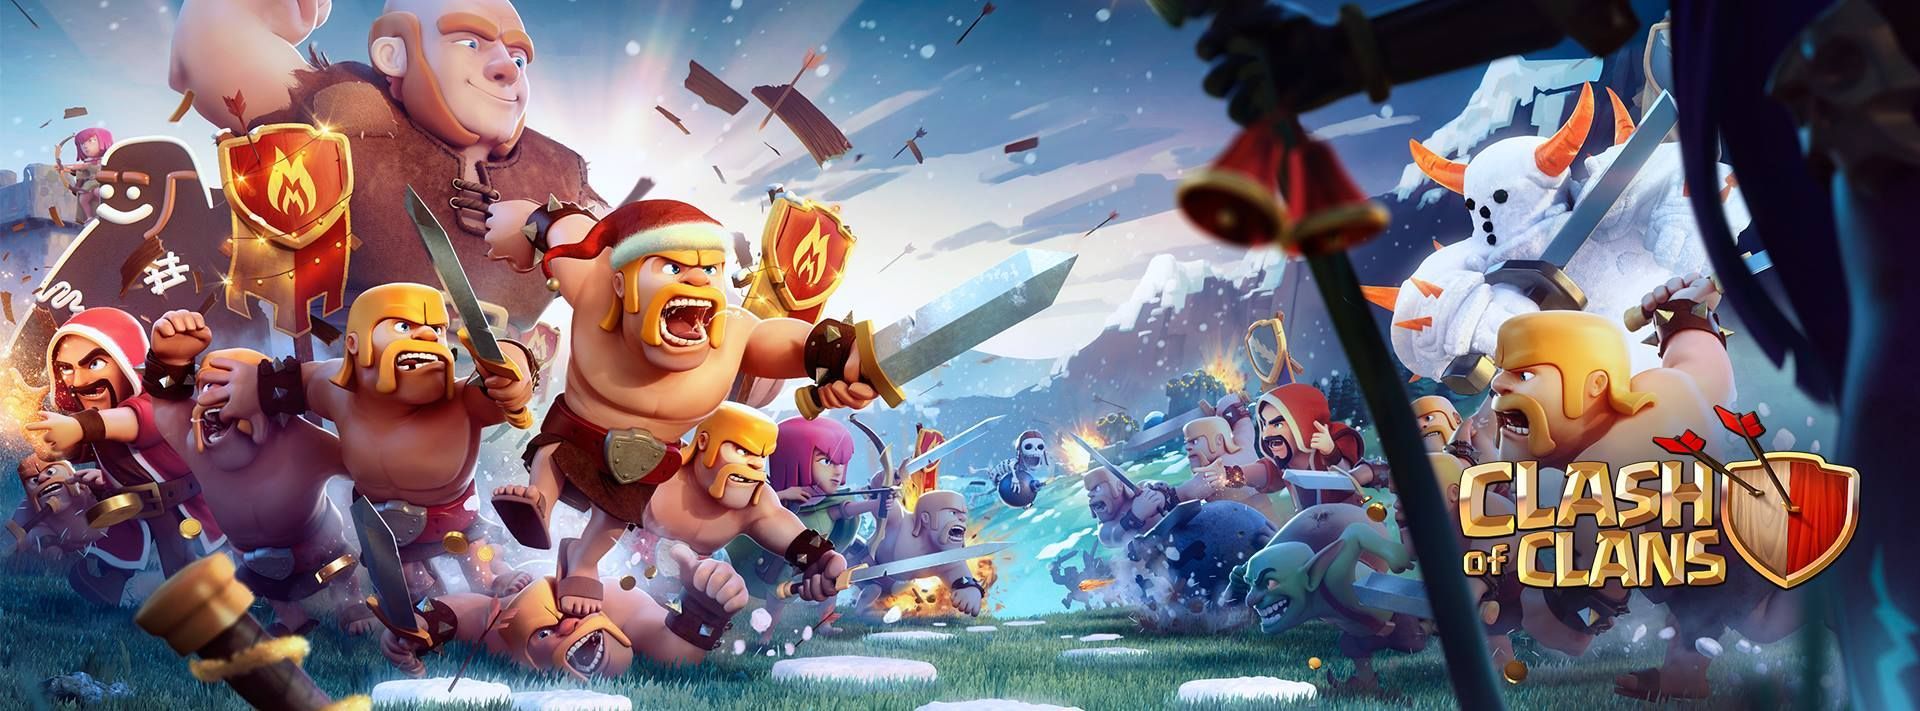 Detail Clash Of Clans Wallpaper 1920x1080 Nomer 7